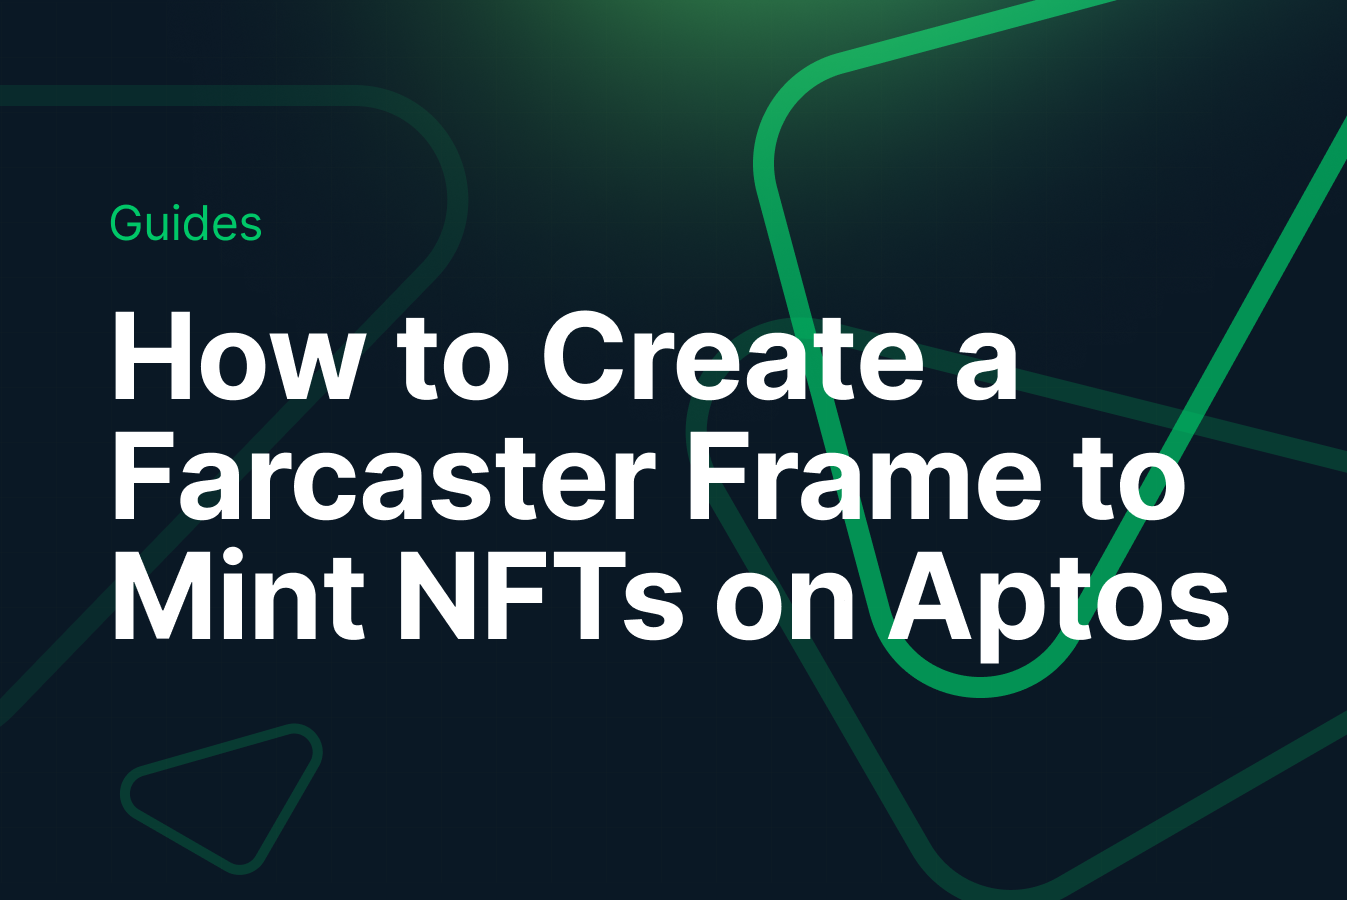 How to Create a Farcaster Frame to Mint NFTs on Aptos